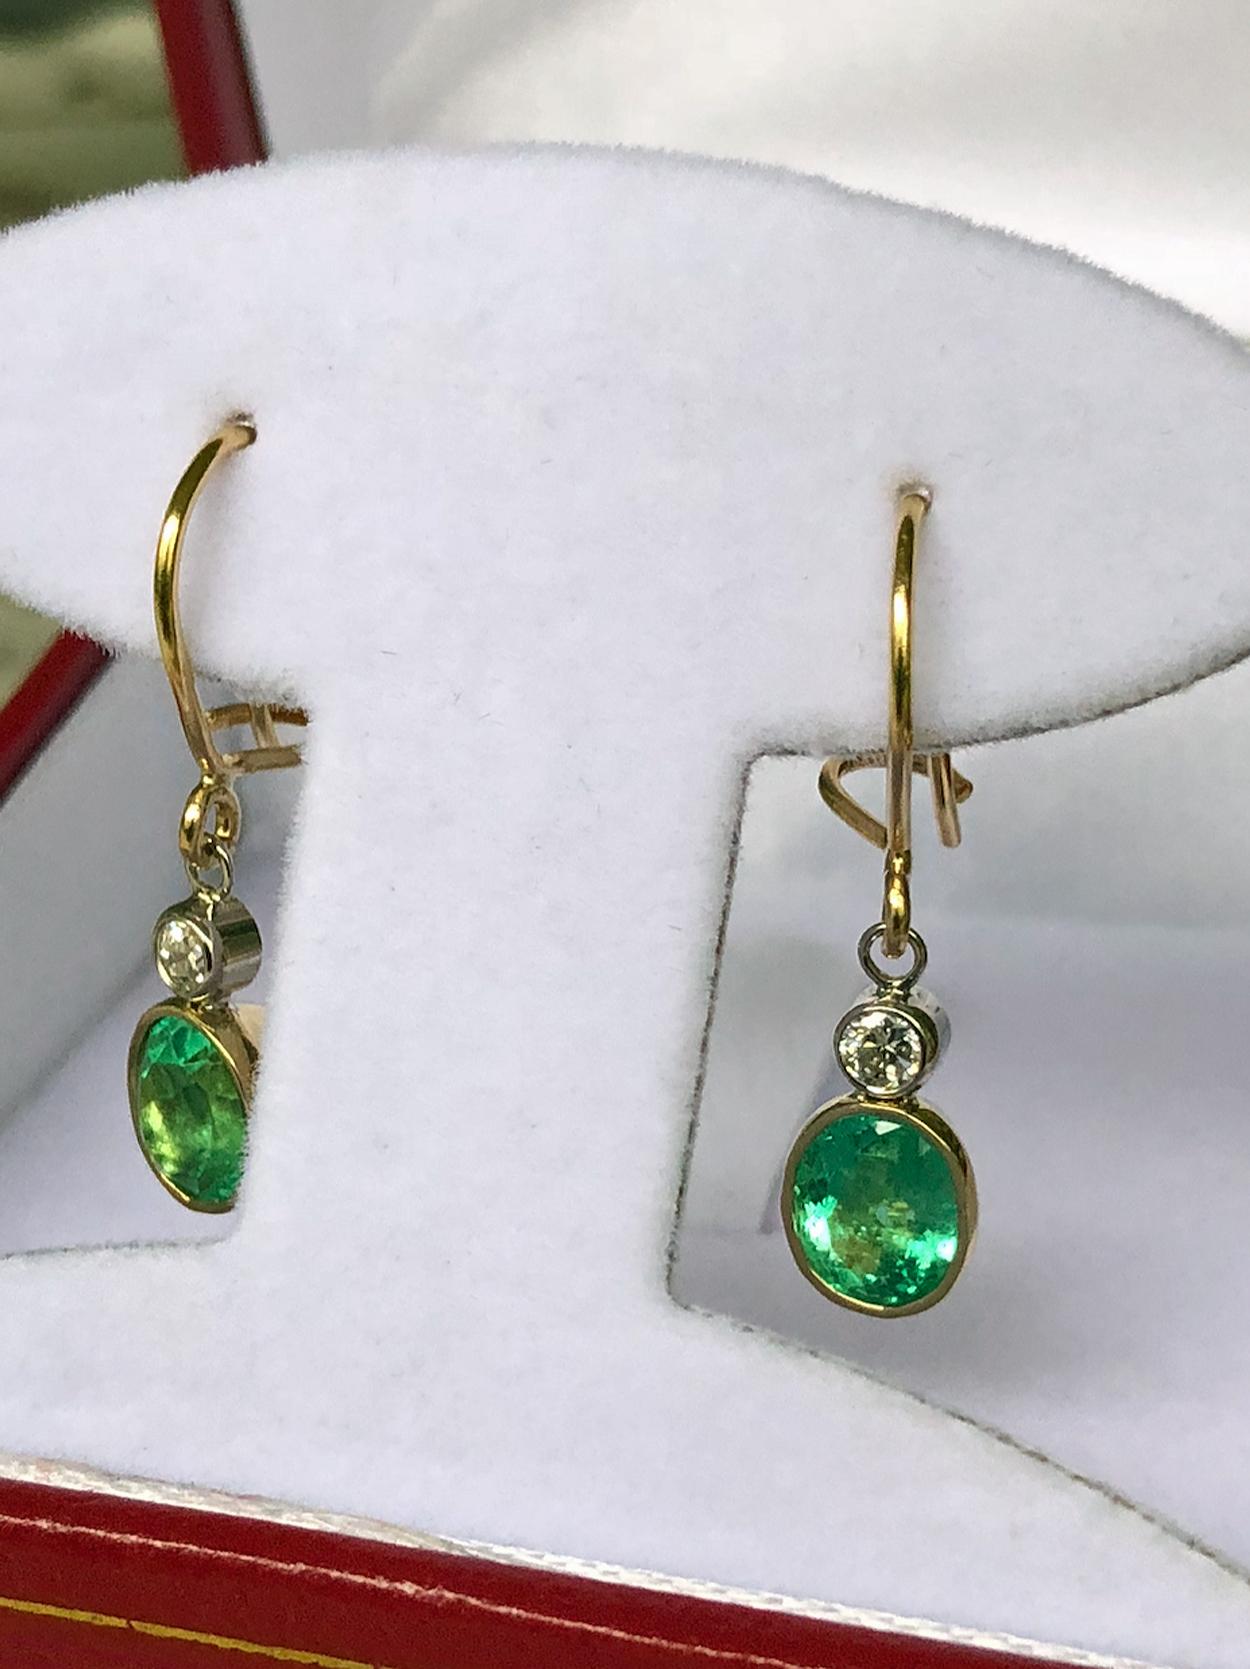 2.60 Carat Natural Colombian Emerald Diamond Dangle Drop Earrings 18K Gold
Primary Stones: 100% Natural Colombian emeralds
Shape or Cut Emerald : Oval Cut 
Average Color/Clarity : Beautiful Medium 100% NATURAL Green Color/ Clarity VS 
Total Weight